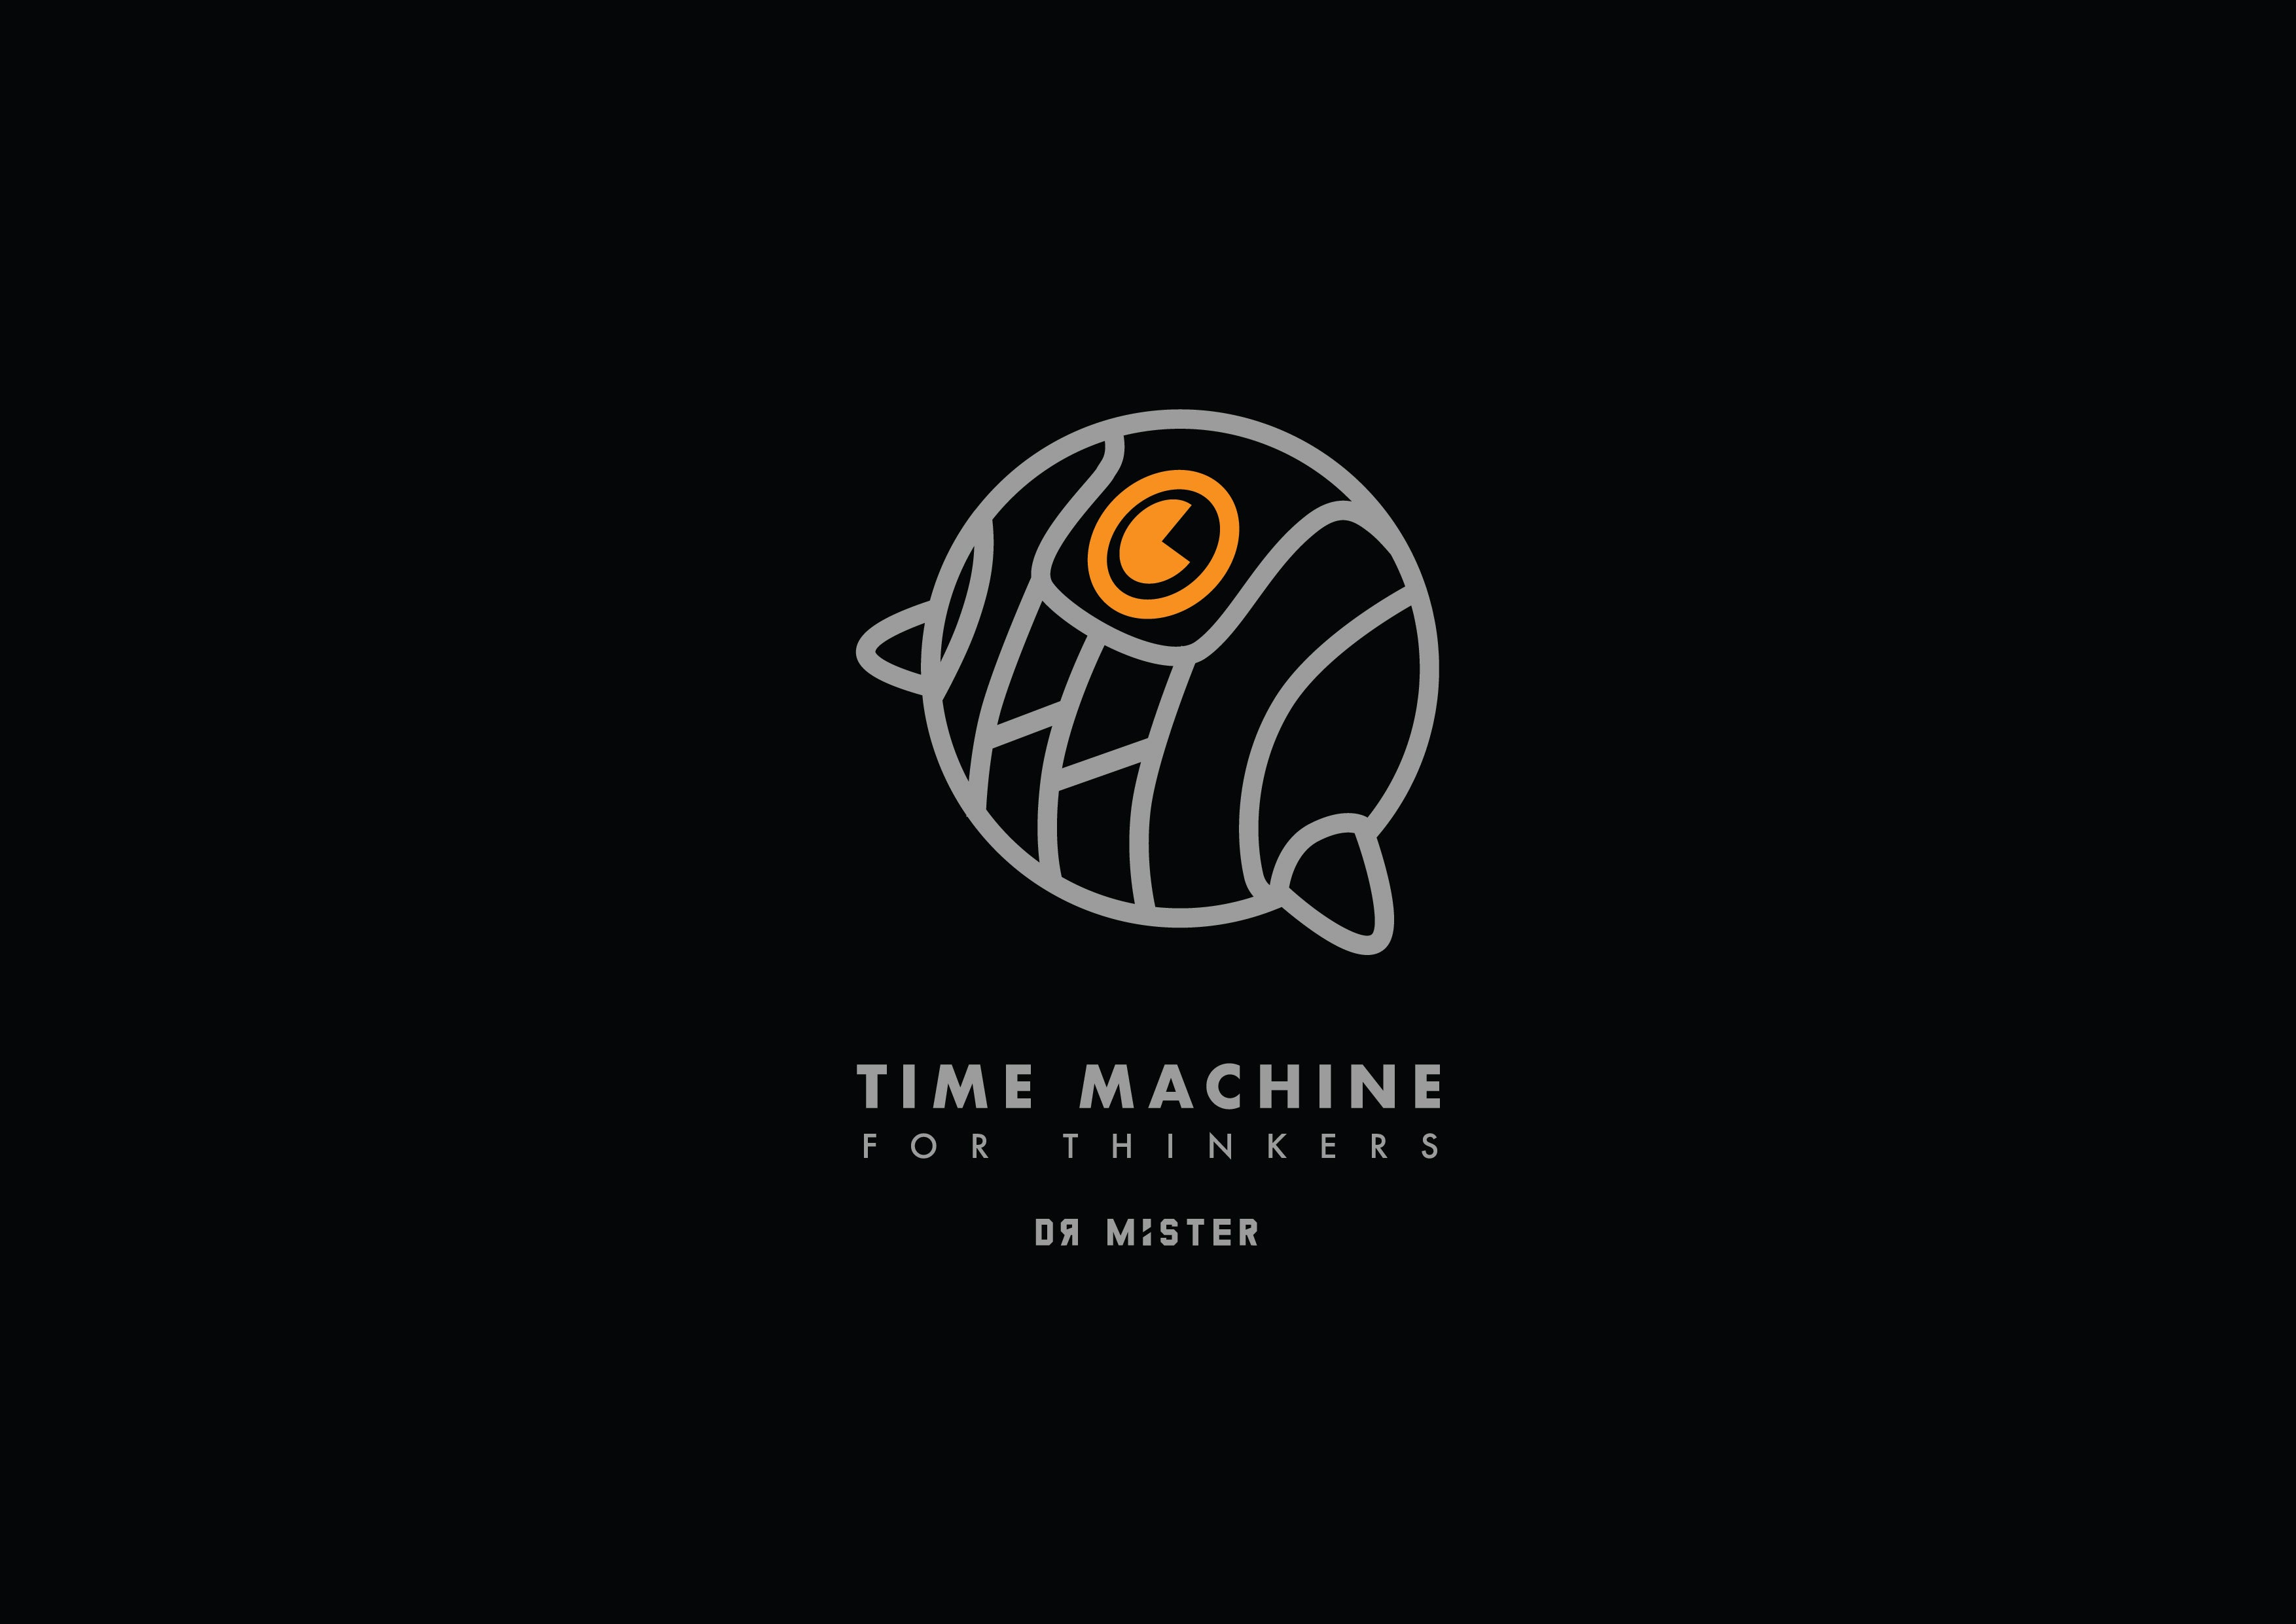 Time Machine For Thinkers (TMFT) by Dr Mister